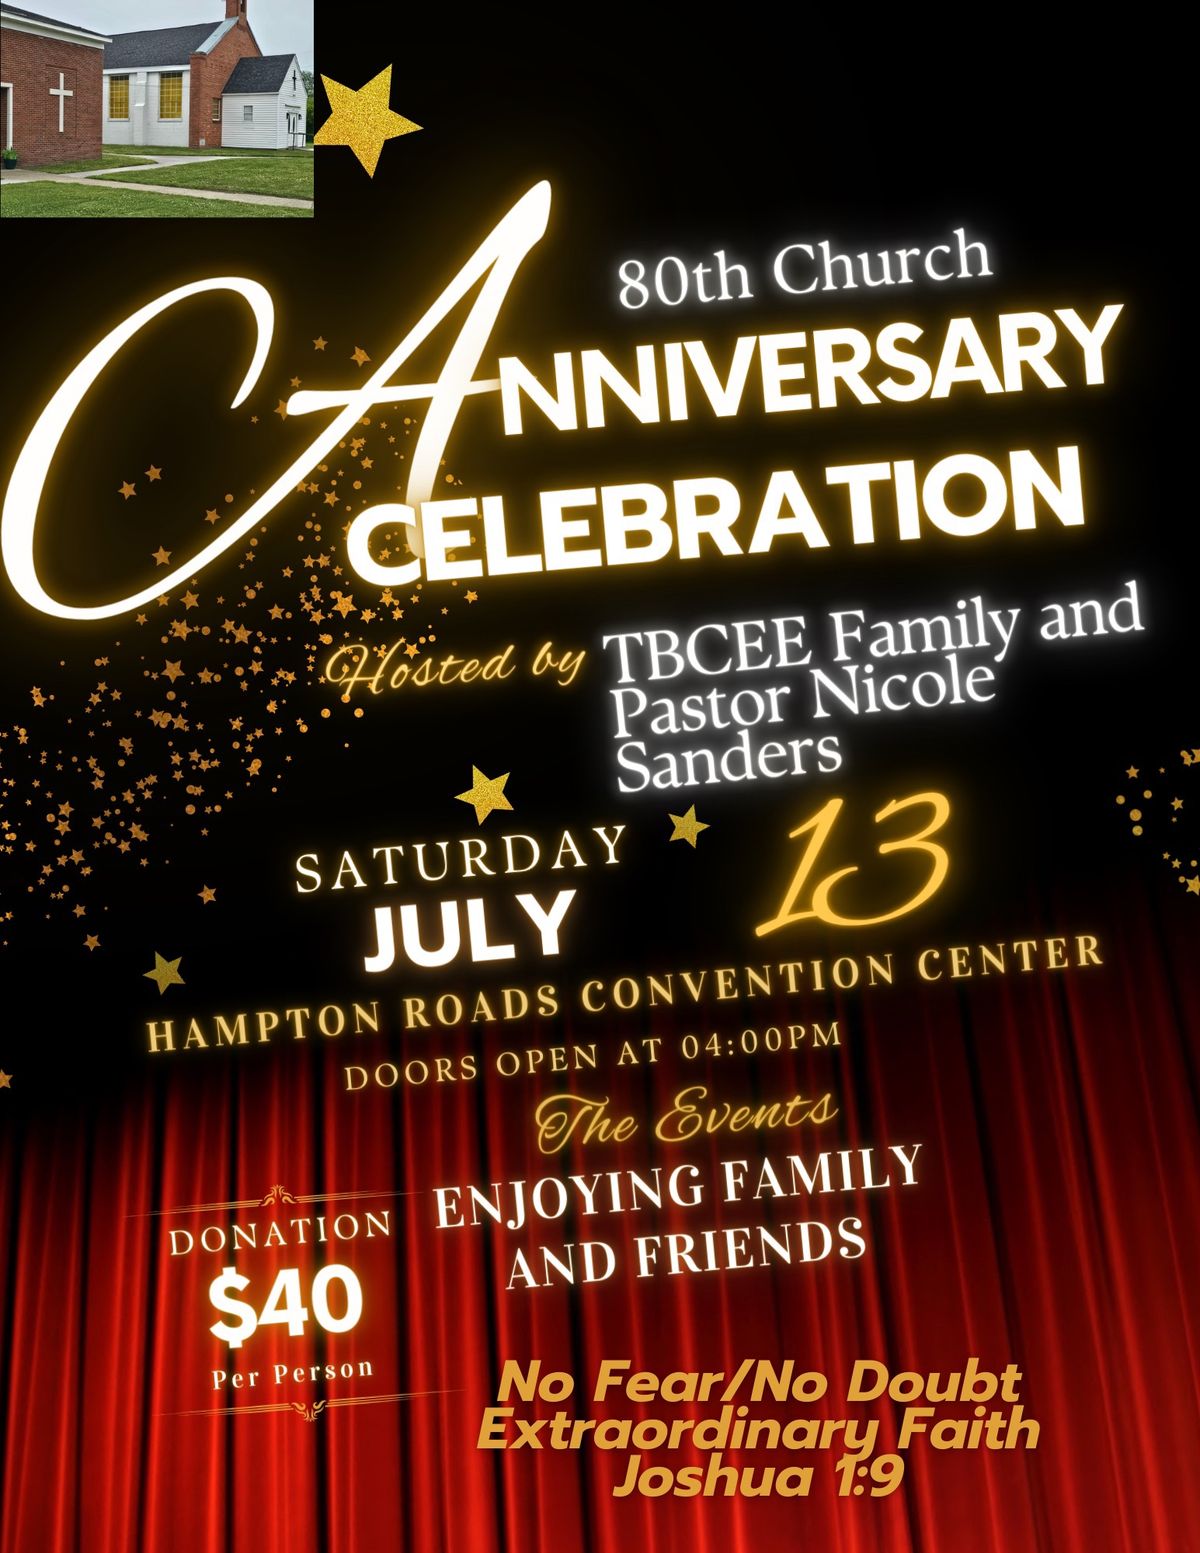 Come Celebrate with us!